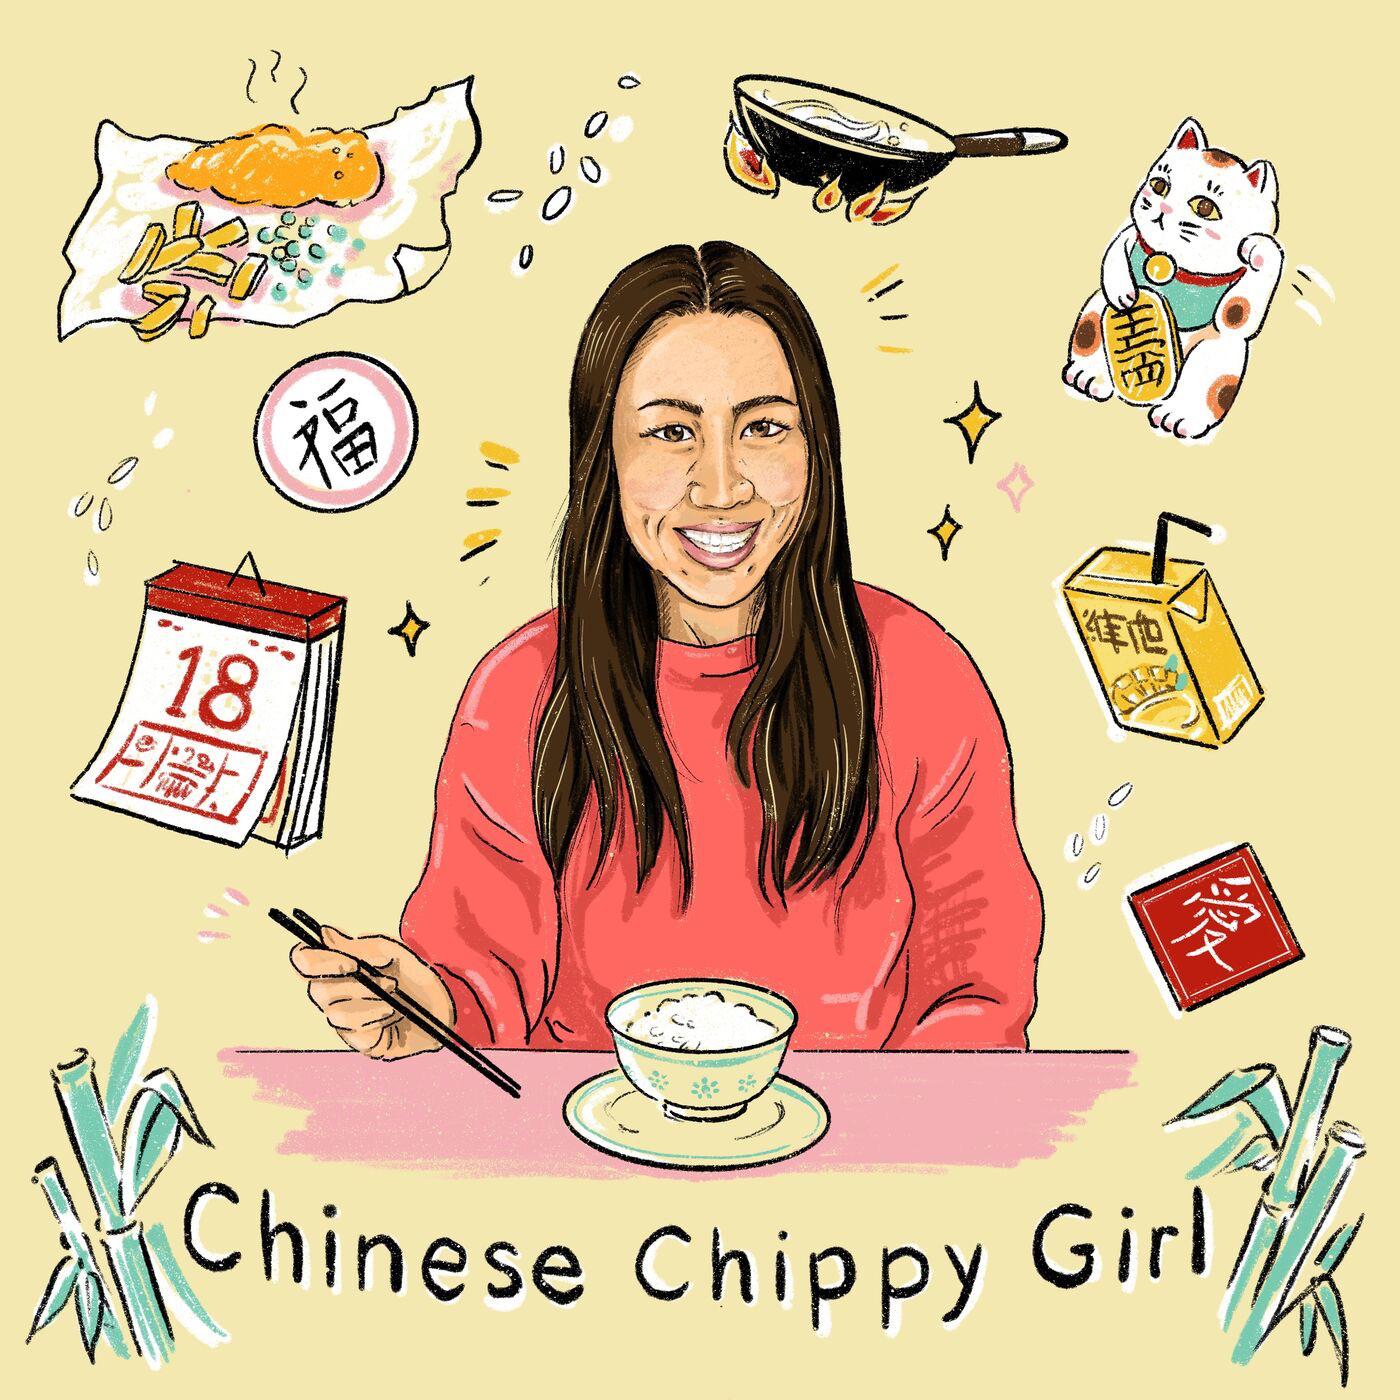 What’s it like being Chinese in the UK’s north?